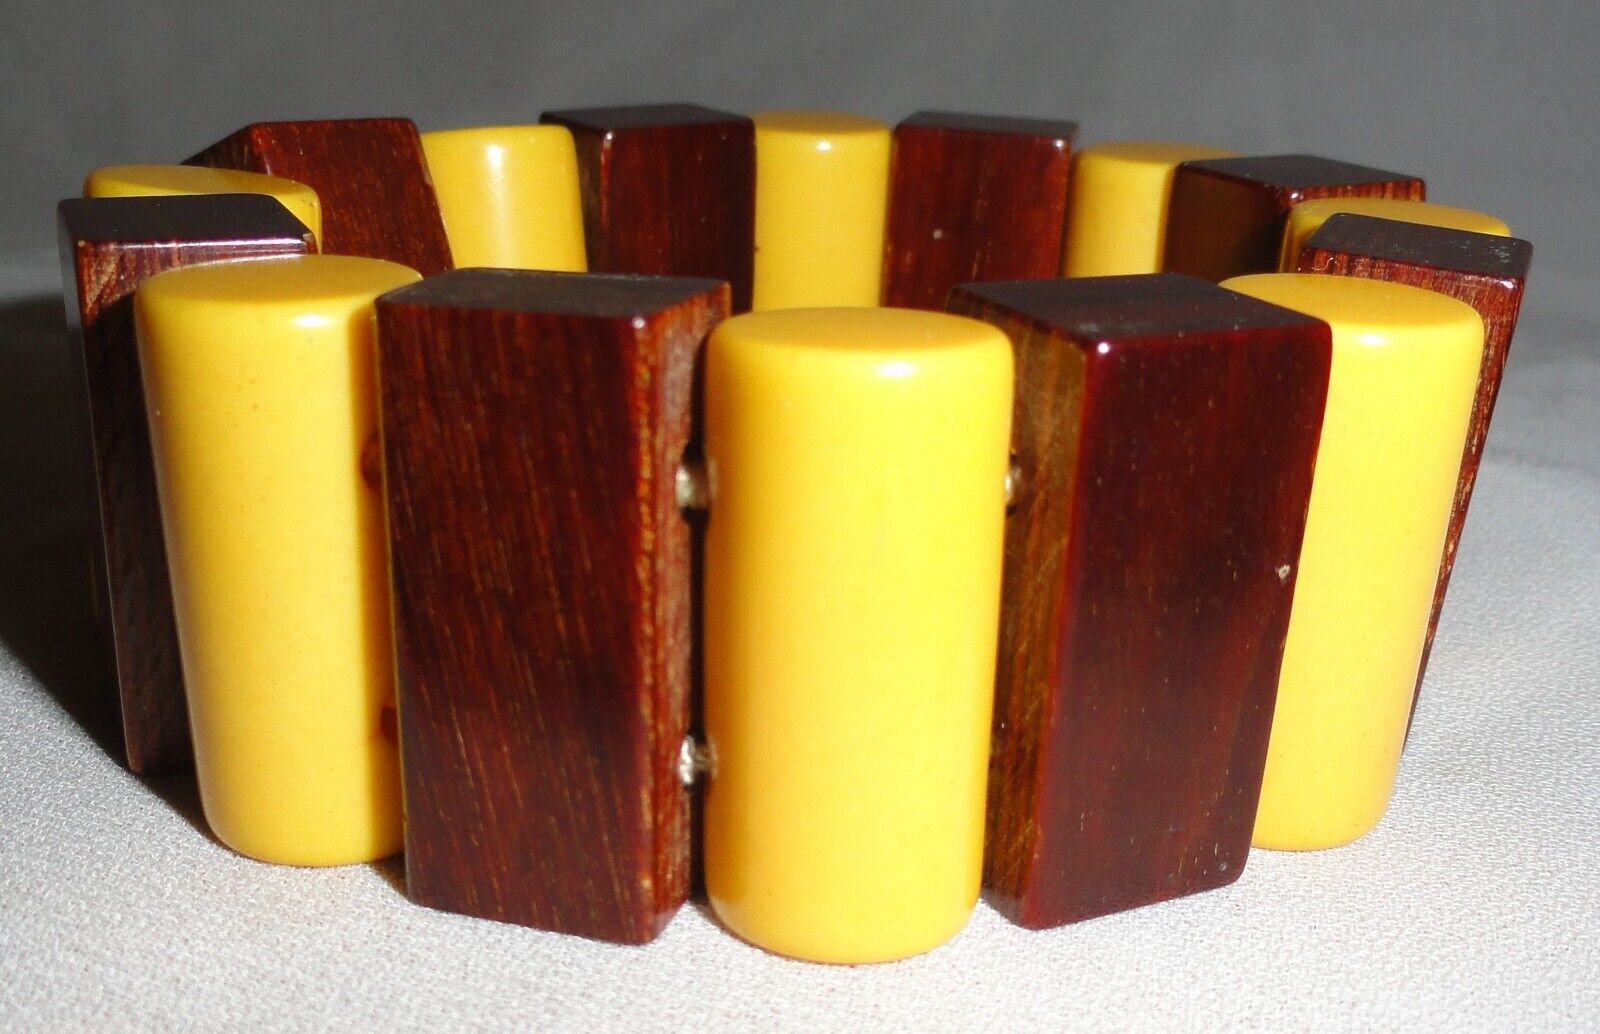 Bakelite Stretch Bracelet Butterscotch w/Brown Marbled Wood Rectangle Beads